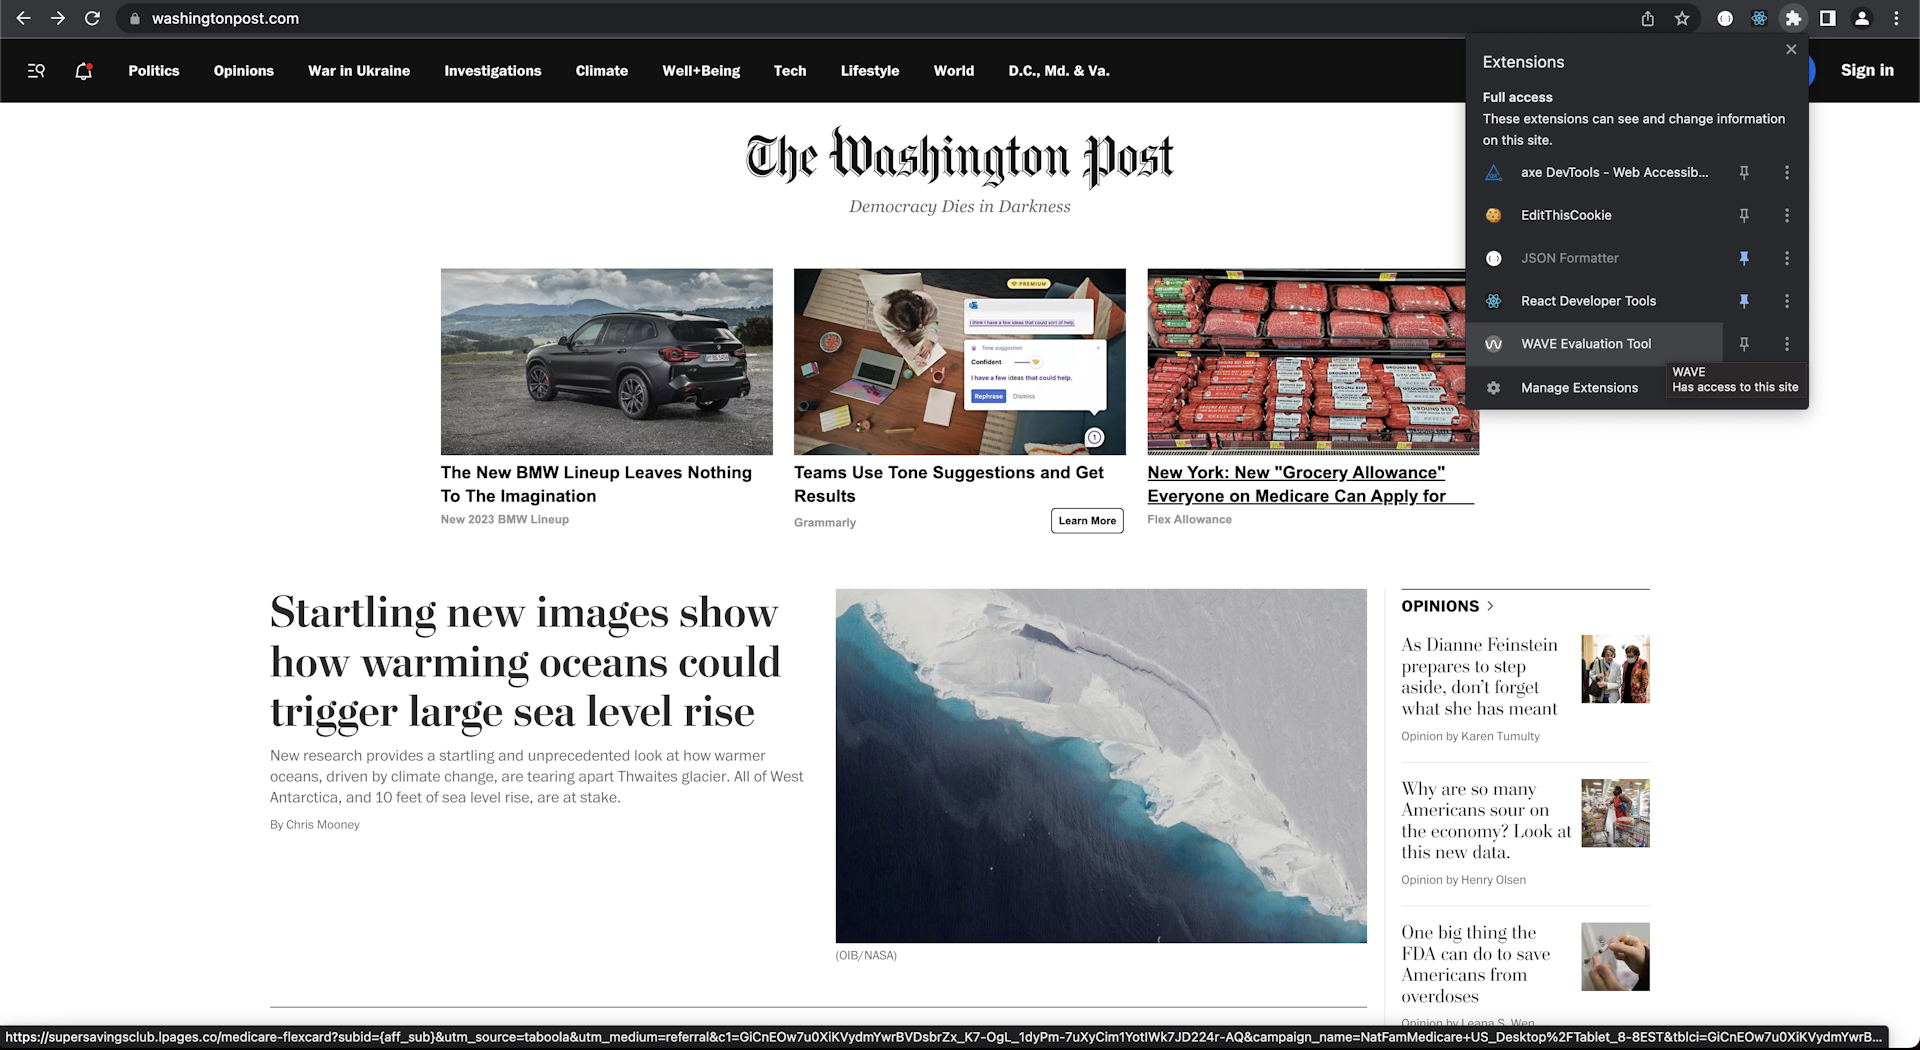 Screenshot shows The Washington Post homepage with the Chrome browser extensions menu open in the top right corner of the browser. The WAVE Evaluation Tool is highlighted in the menu as the user has it in focus.